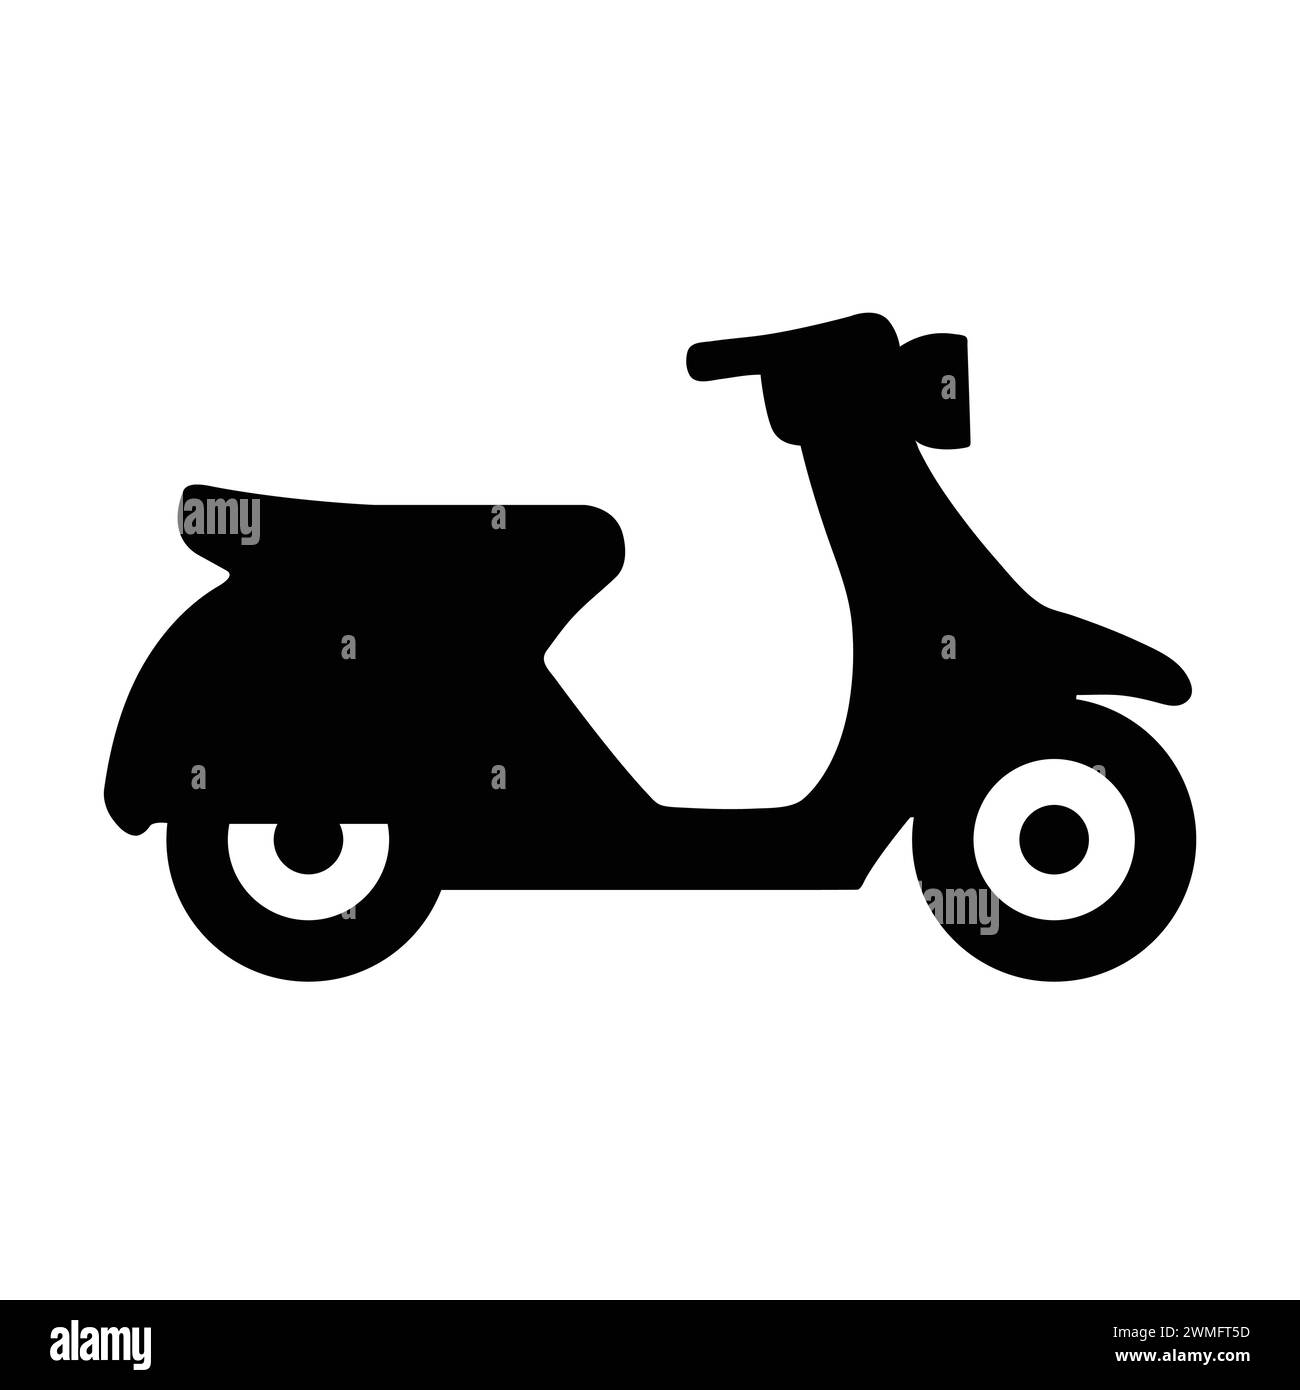 Scooter Icon. Simple Design For Websites Or Mobile Apps. Motorcycle Pictogram Vector Illustration. Moped Or Motorbike Silhouette Stock Vector